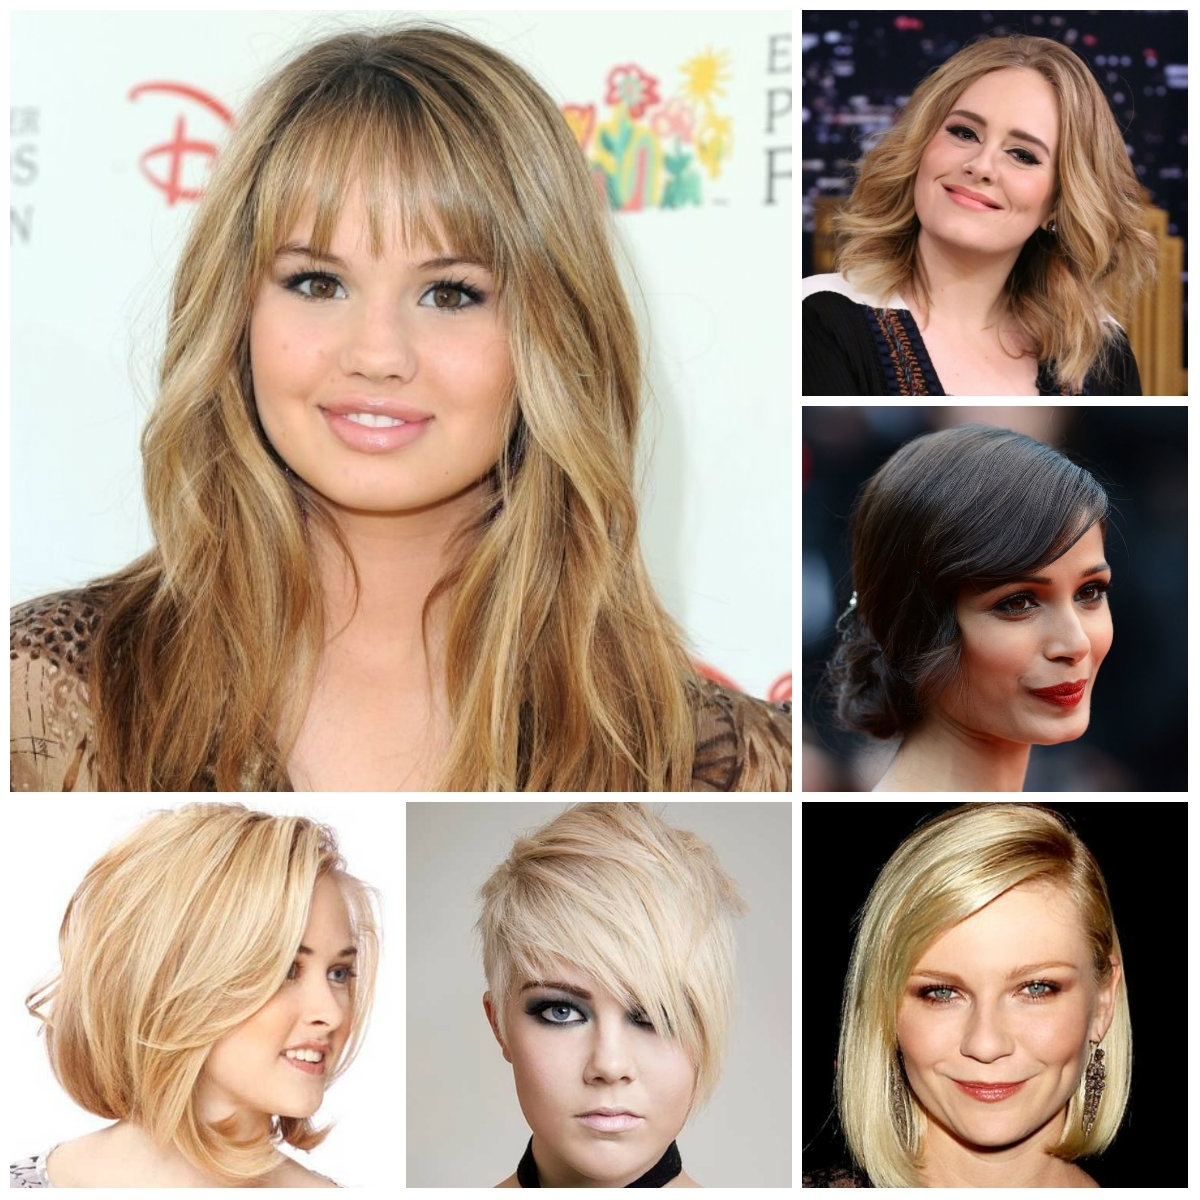 Medium Hairstyles For Chubby Faces - Hairstyle For Women &amp; Man within Haircut For Round Chubby Face 2017